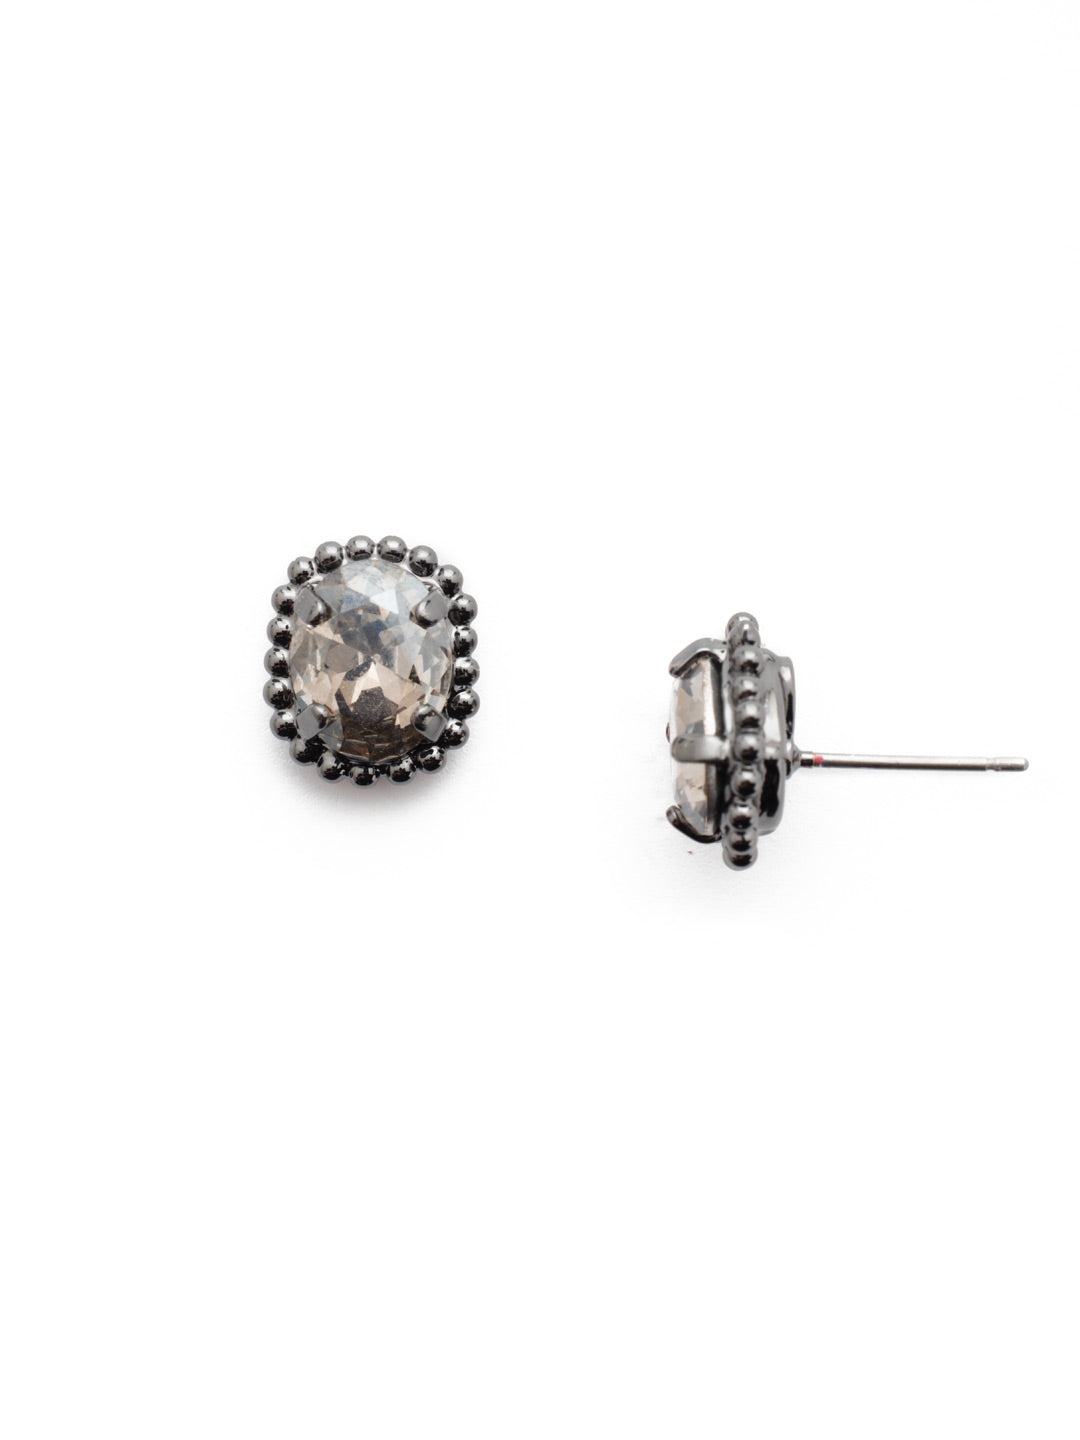 Oval-Cut Solitaire Stud Earrings - EDQ10GMGNS - <p>These simple stud earrings feature a beautiful oval crystal surrounded by a decorative edged border. From Sorrelli's Golden Shadow collection in our Gun Metal finish.</p>